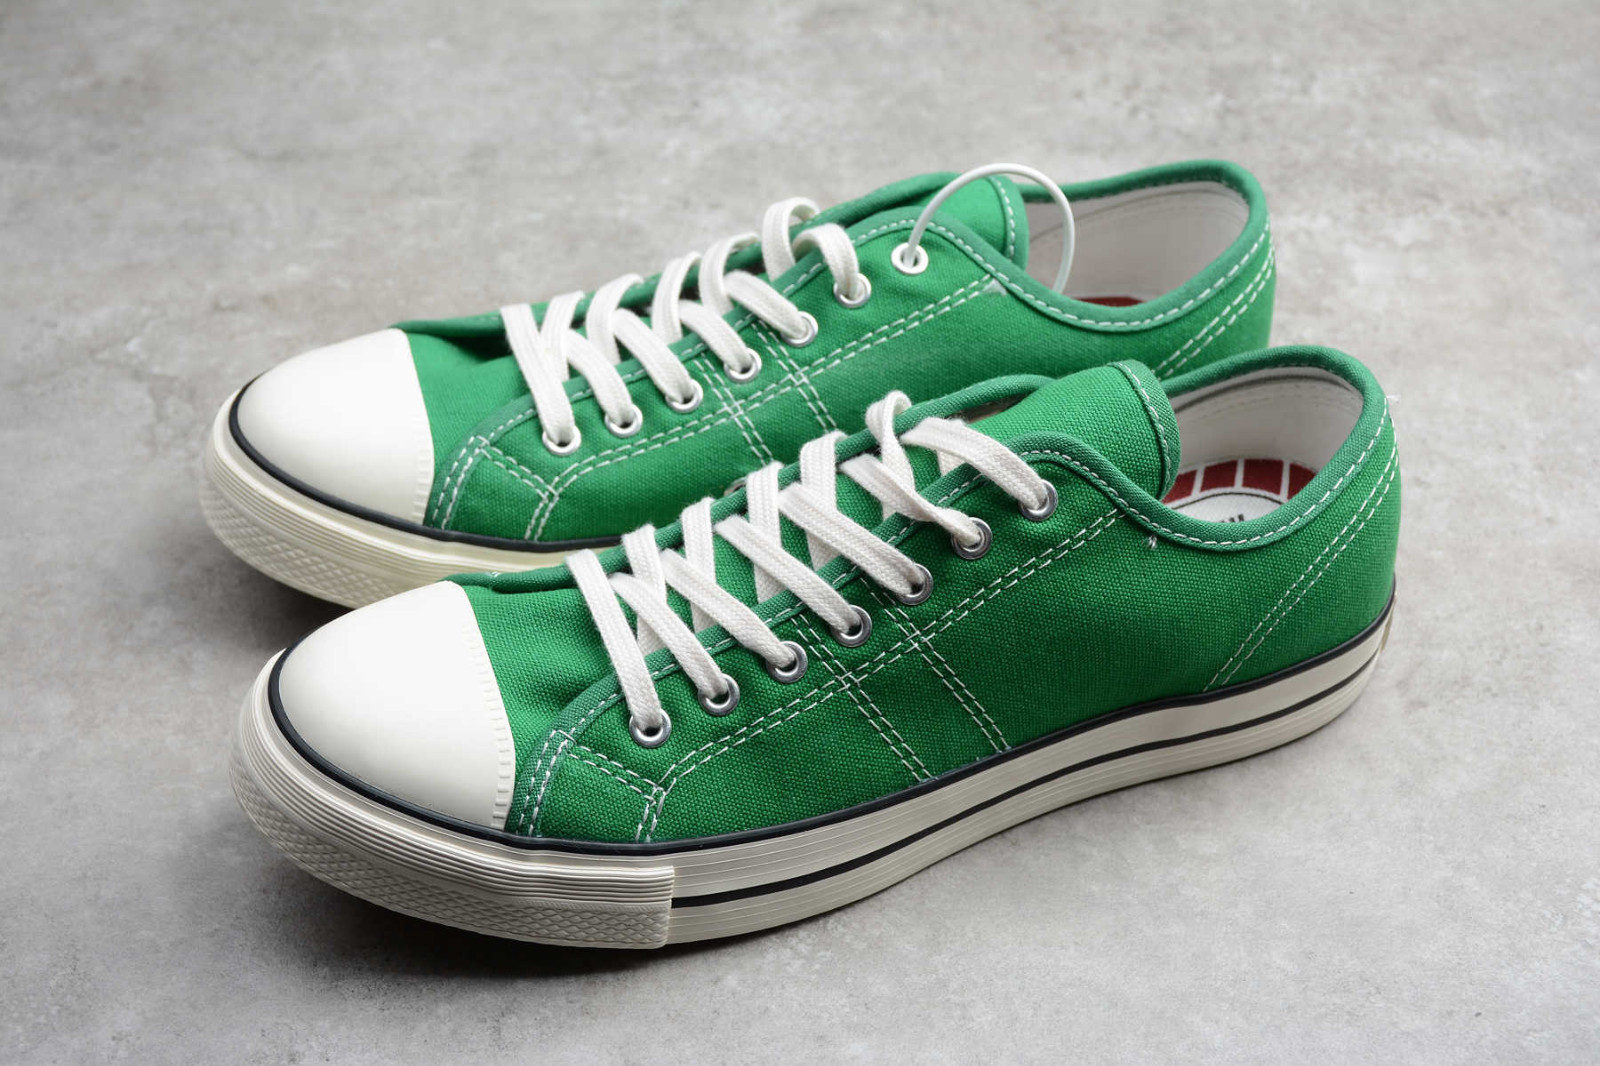 Converse Lucky Star Ox Green Gum 164216C - MultiscaleconsultingShops